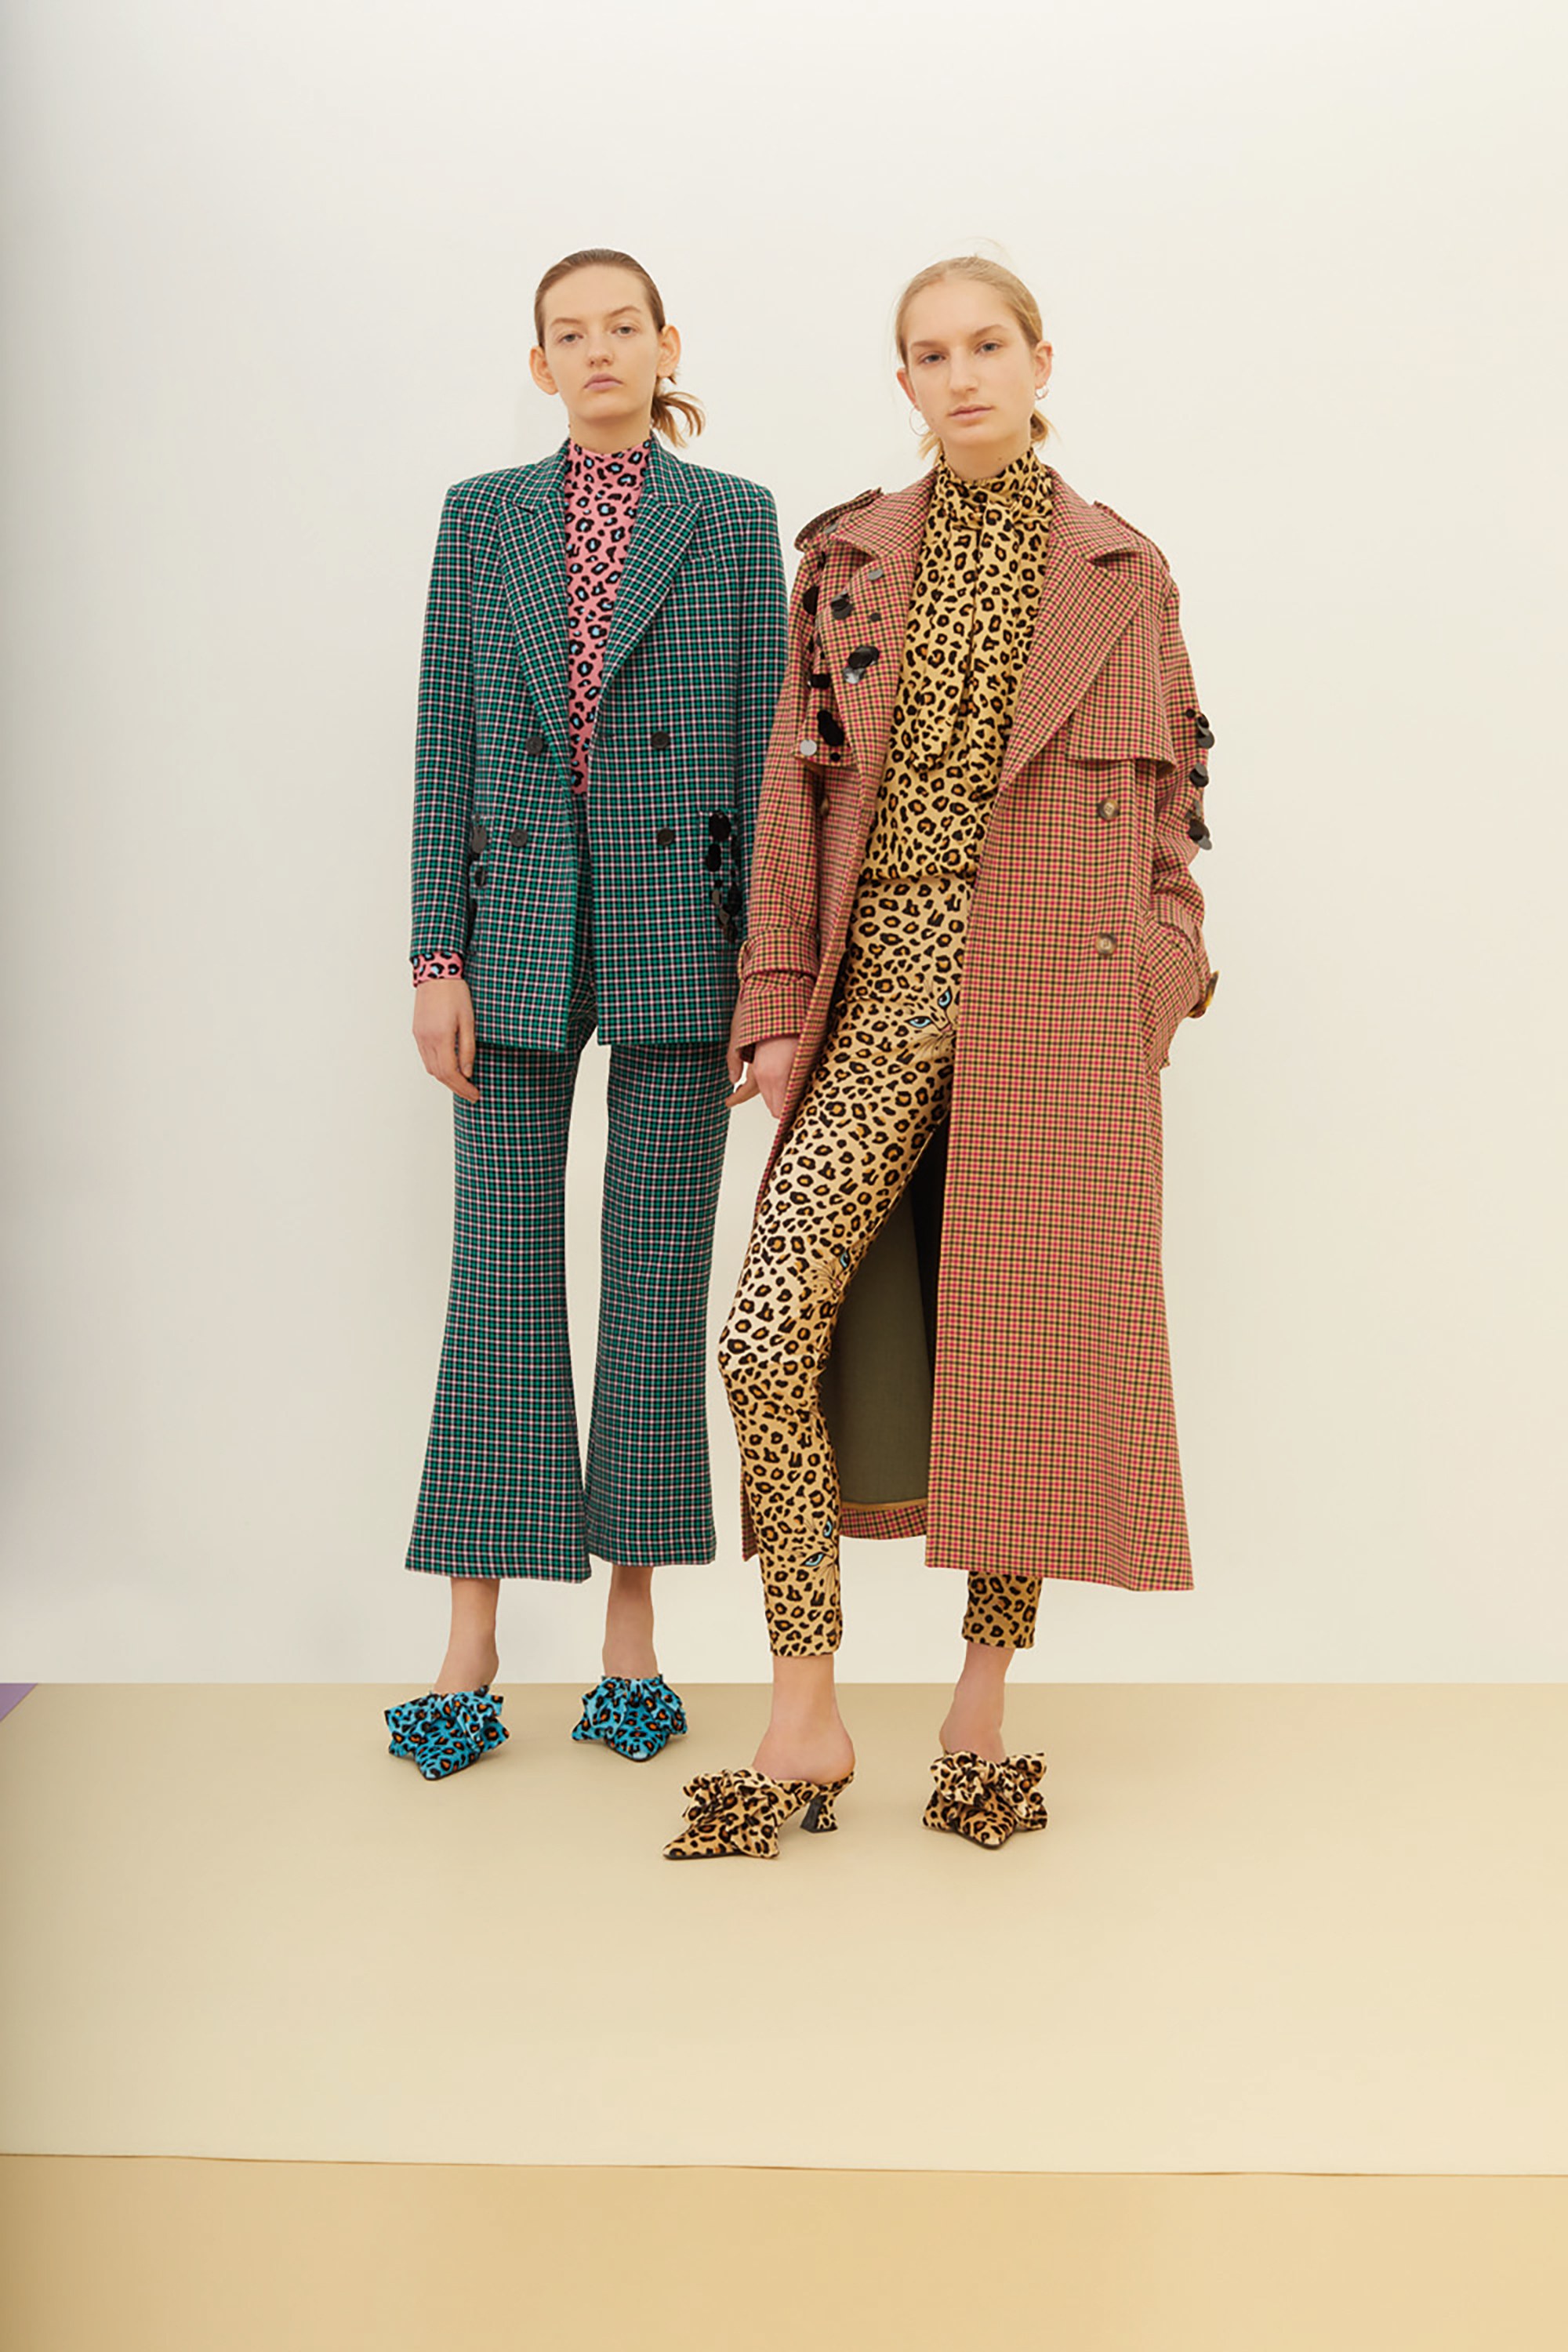 Outfit Inspiration From Pre-Fall 2018 - The Fashion Folks